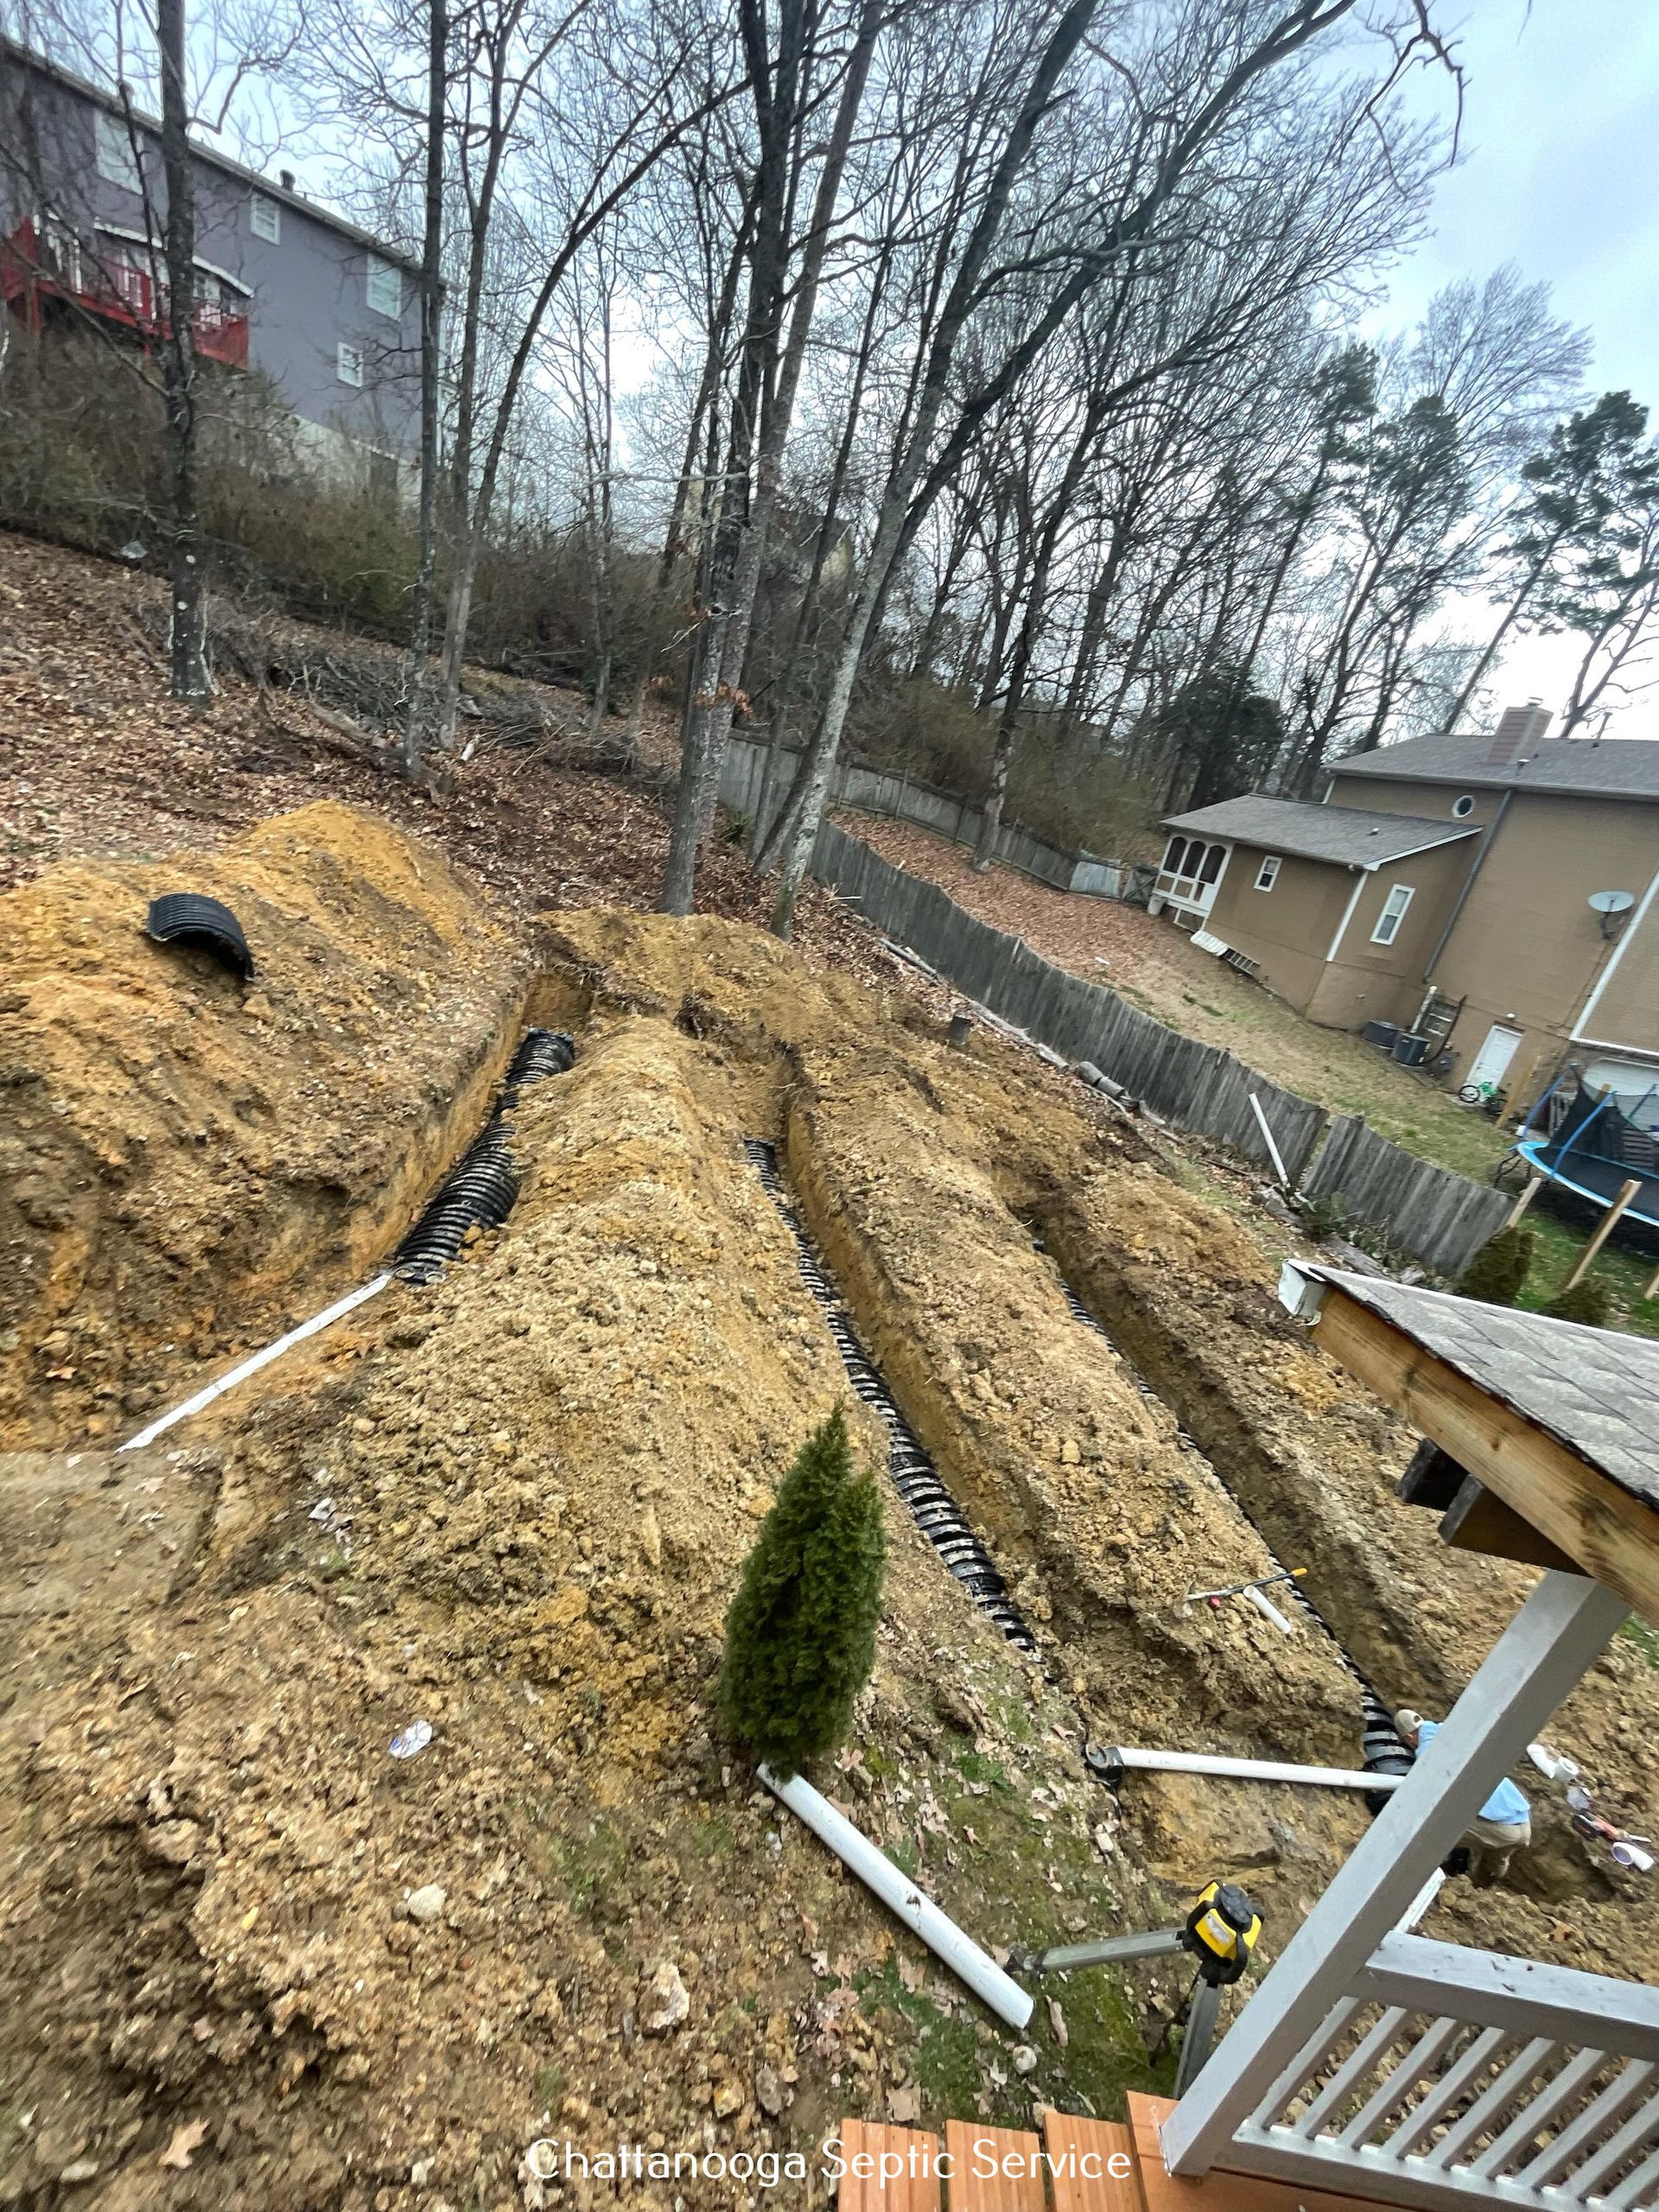 septic tank pumping chattanooga